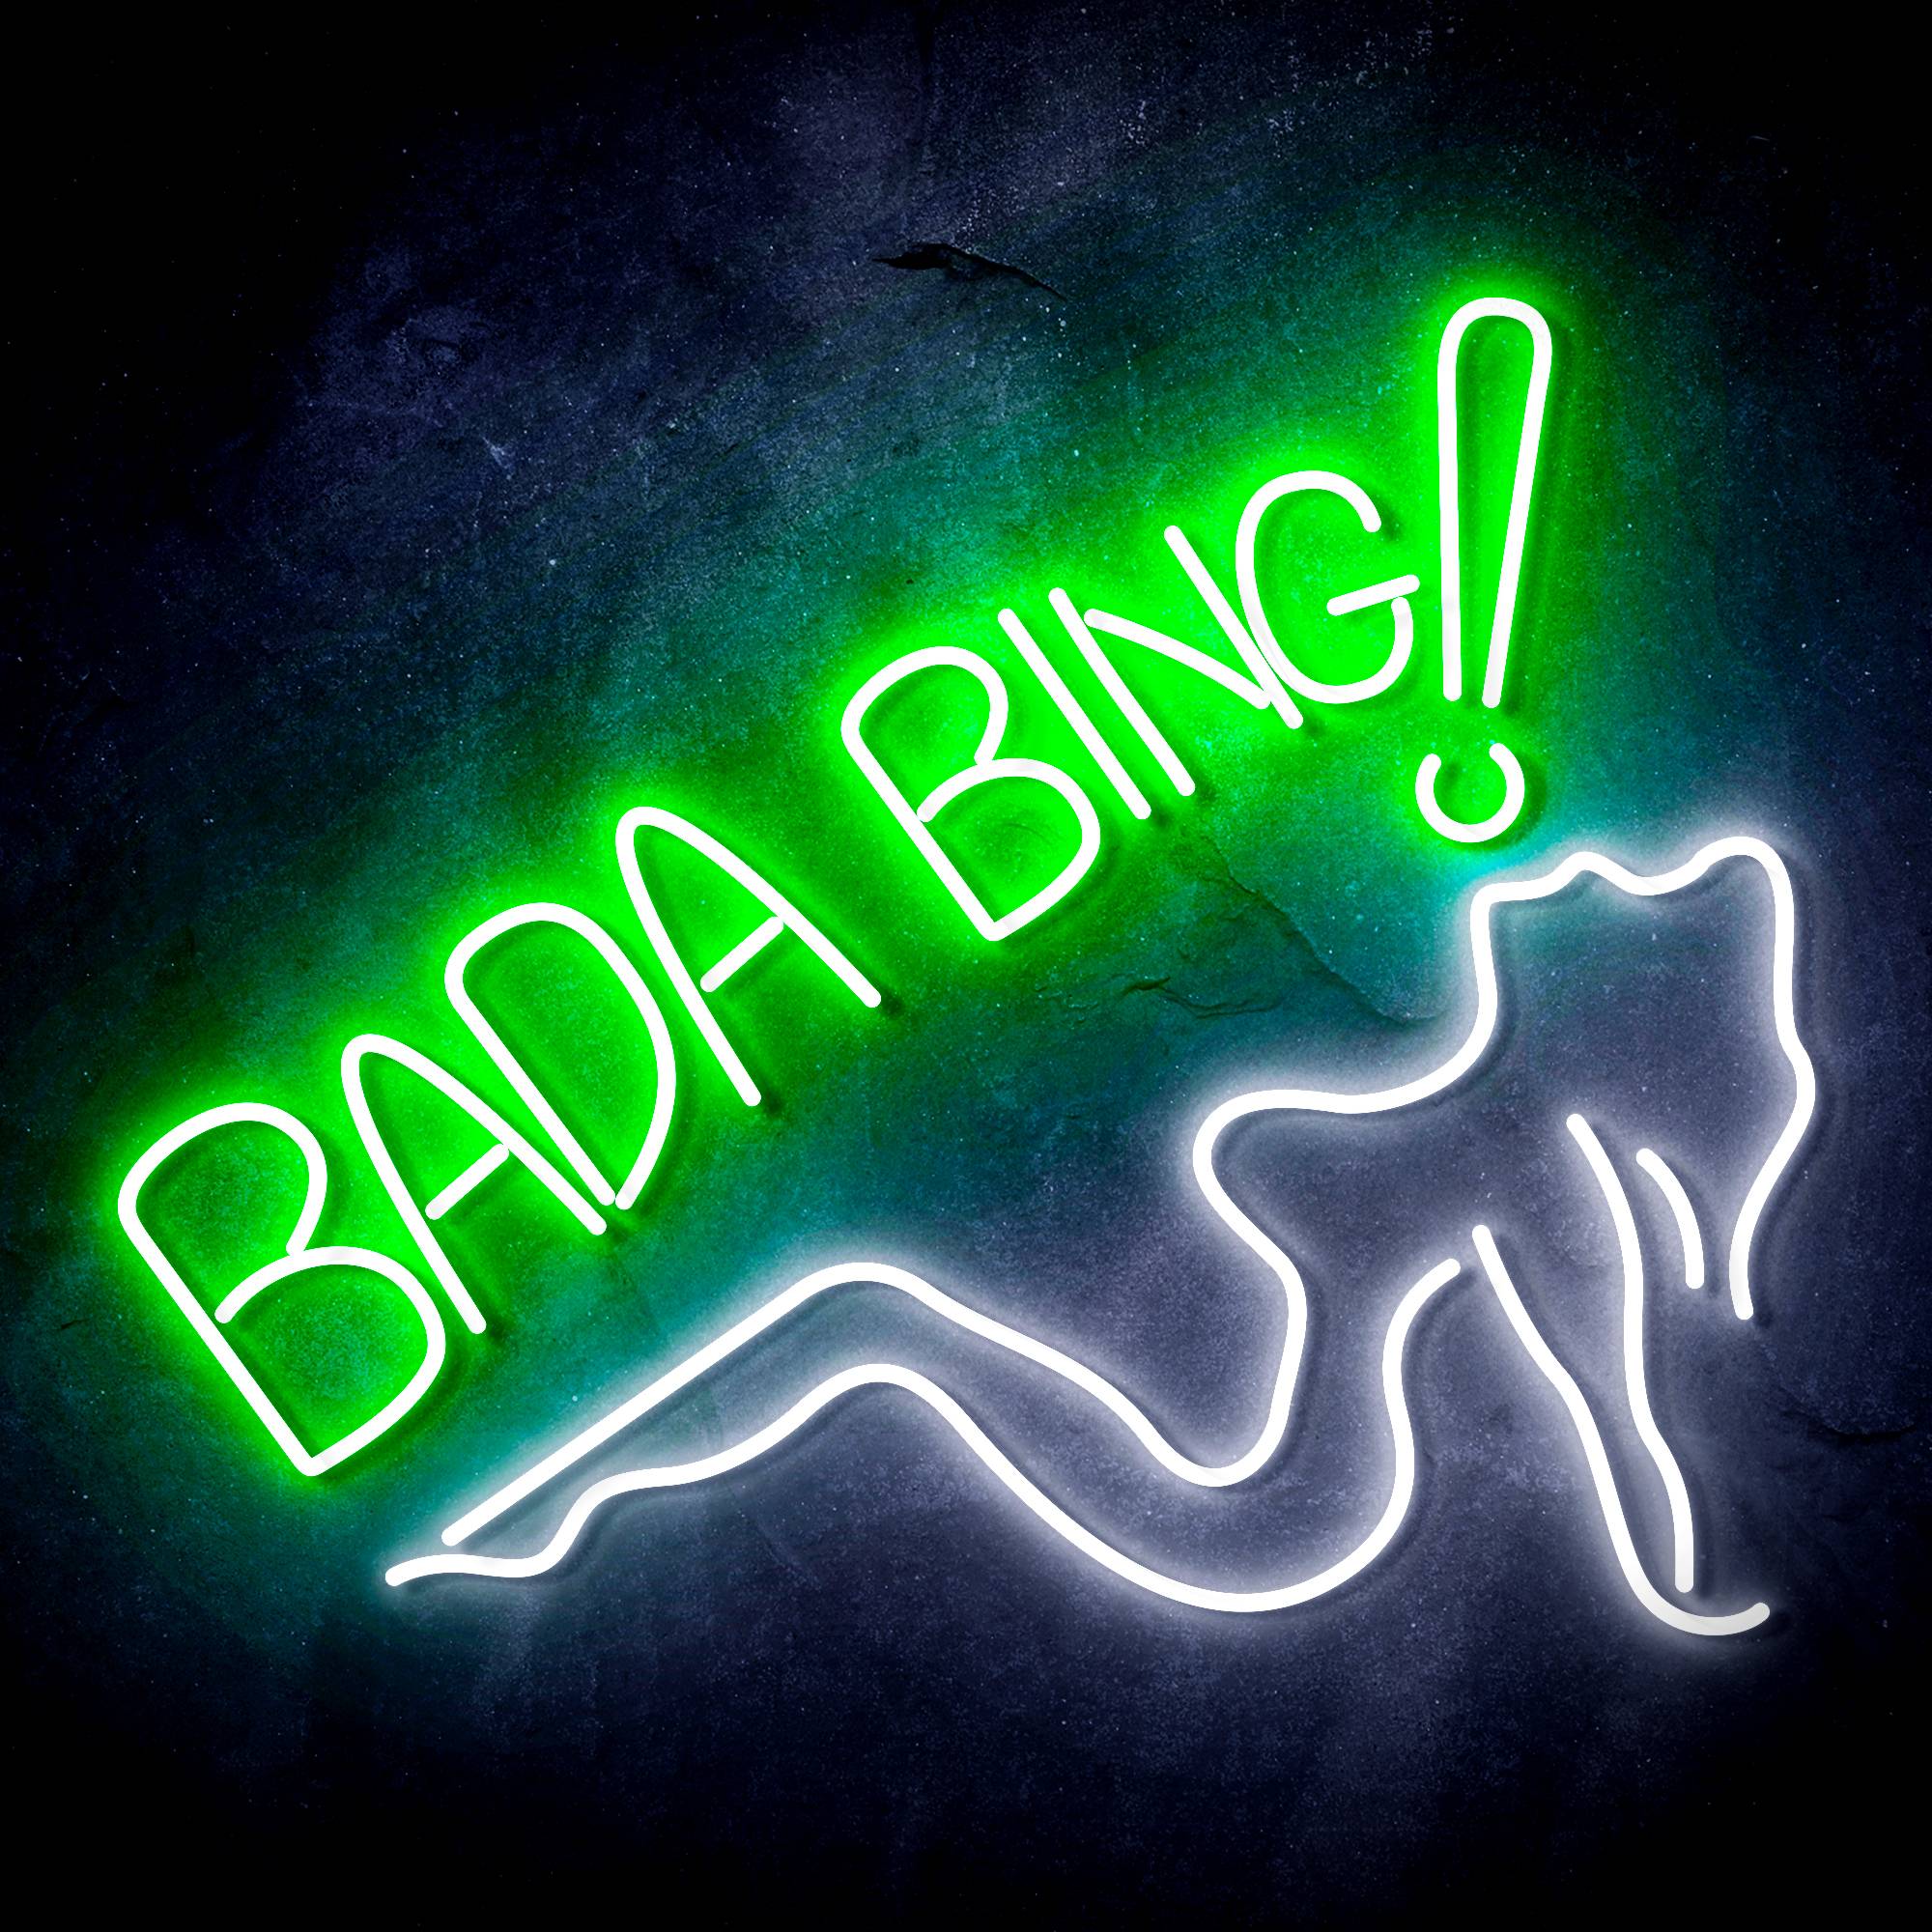 Bada Bing! With Sexy Lady LED Neon Sign